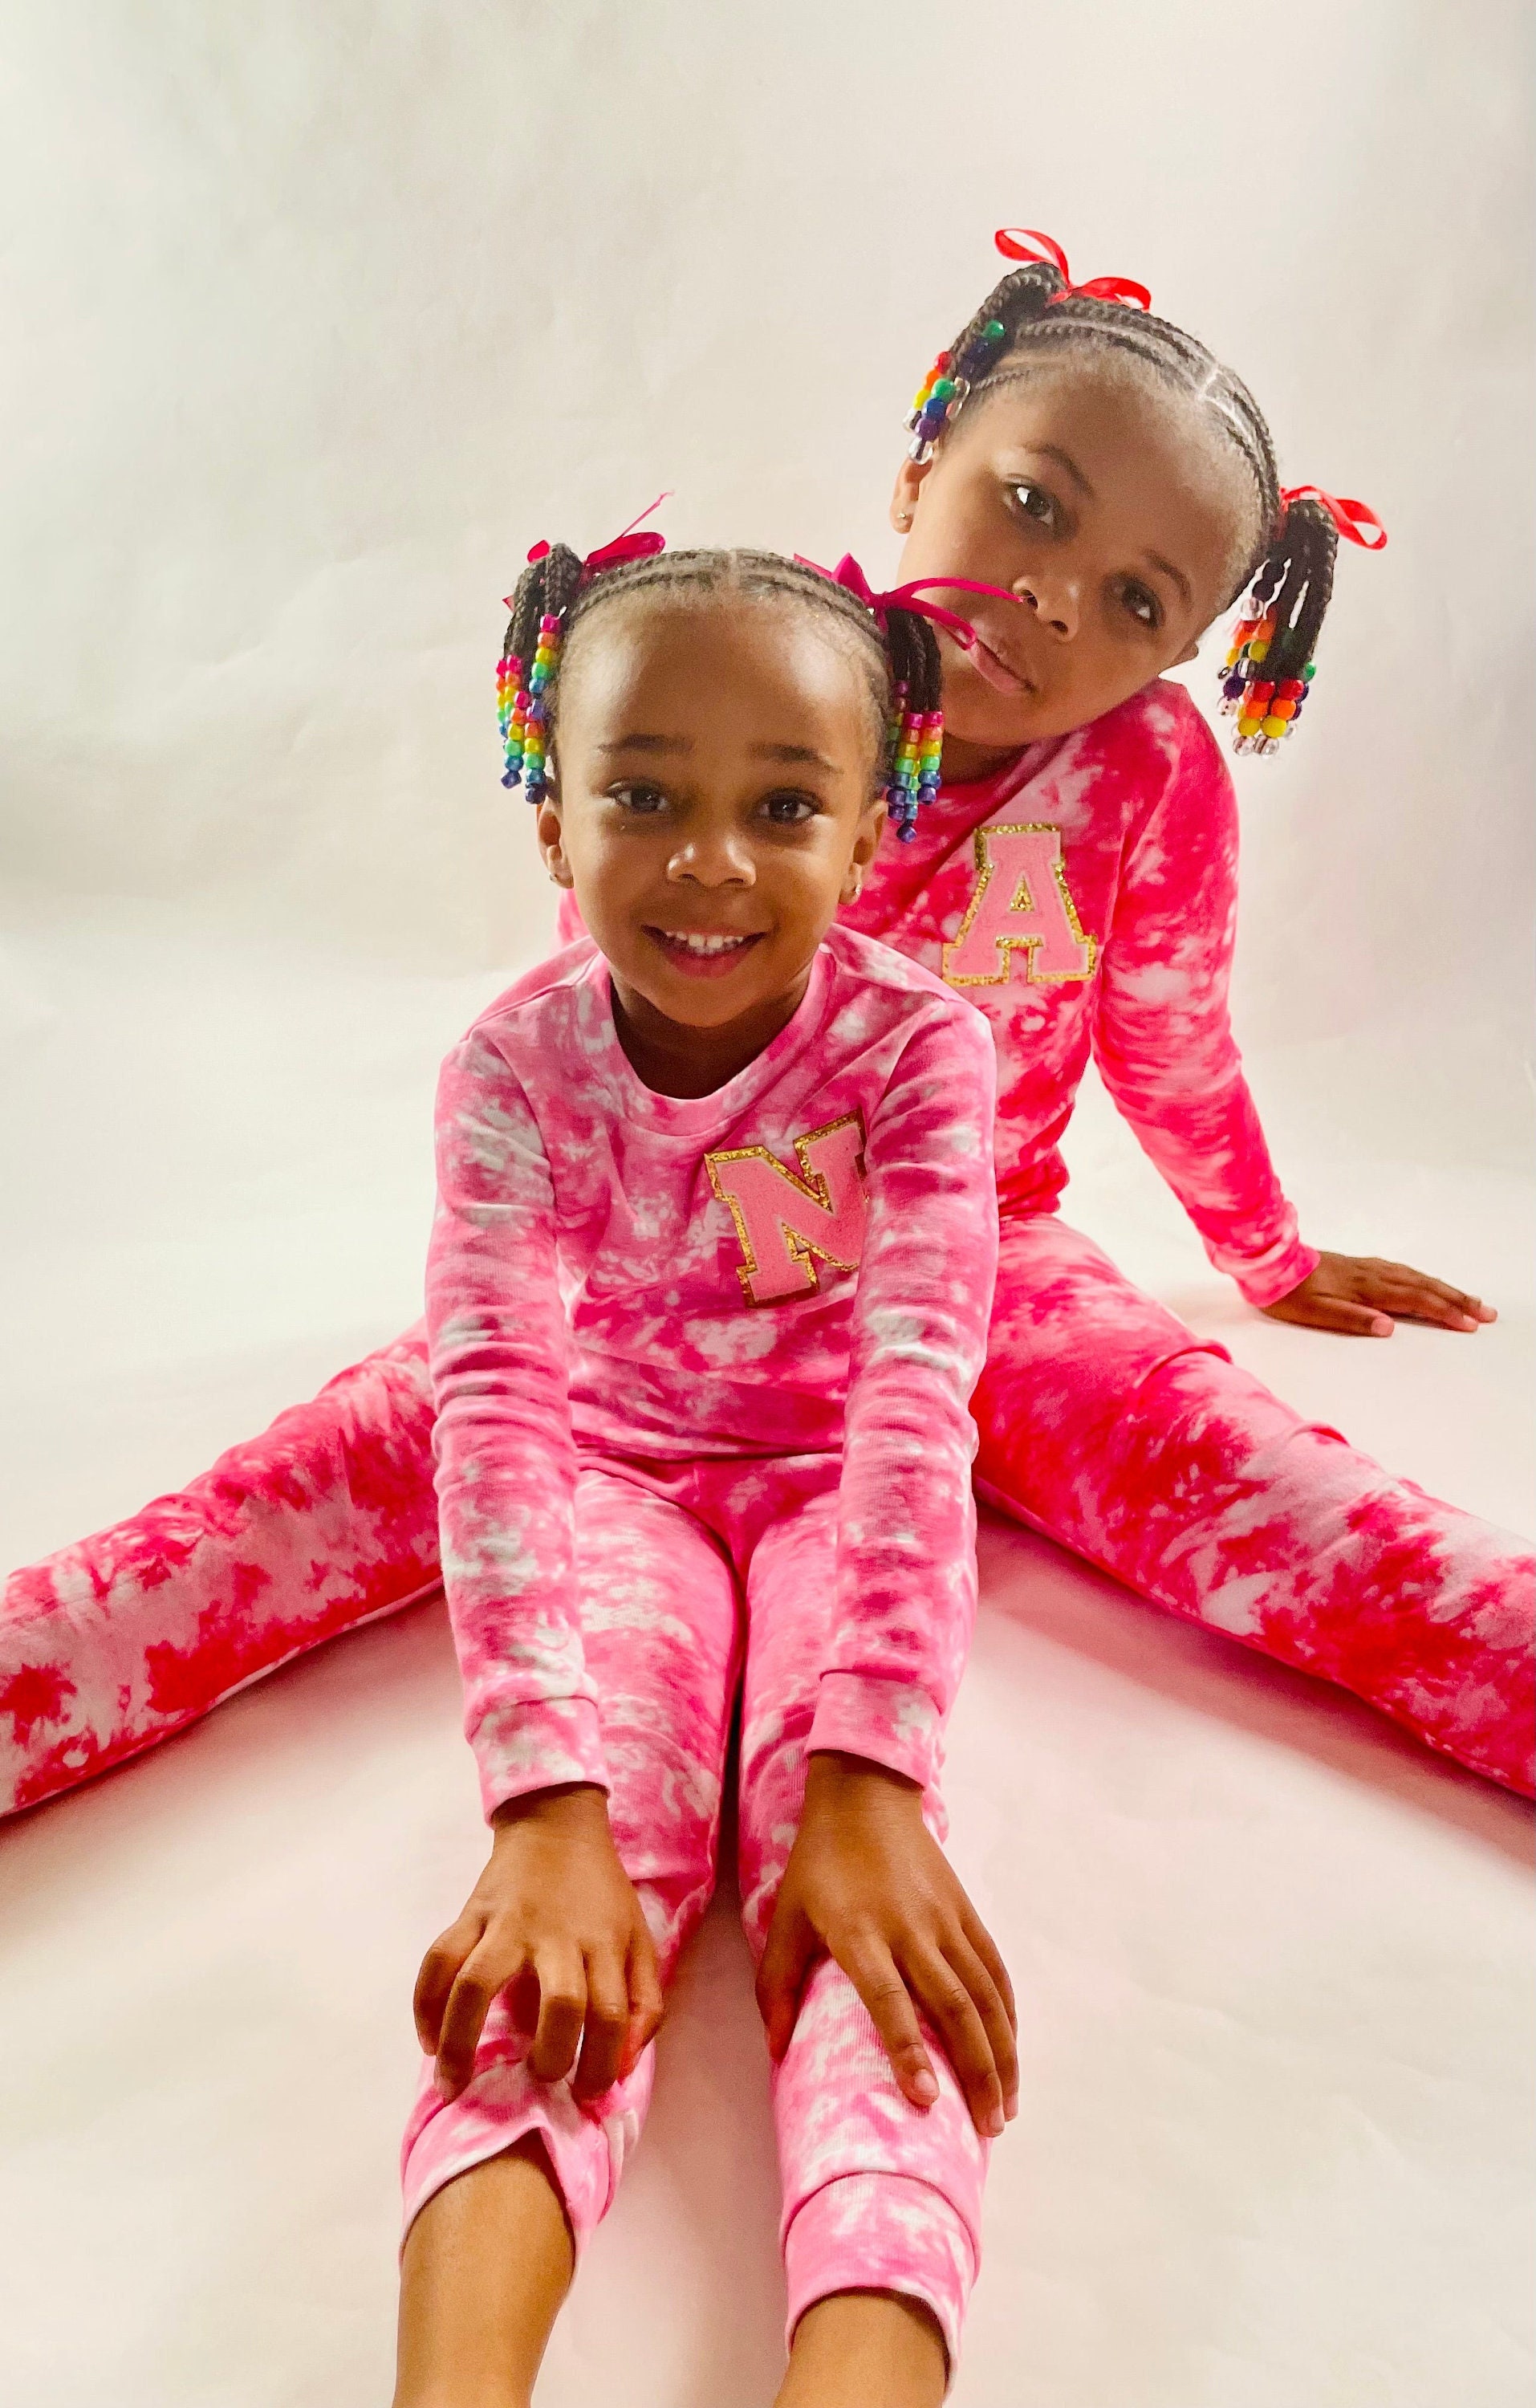 Custom Boy & Girl Toddler Pajamas When I Grow up I Want to Be A